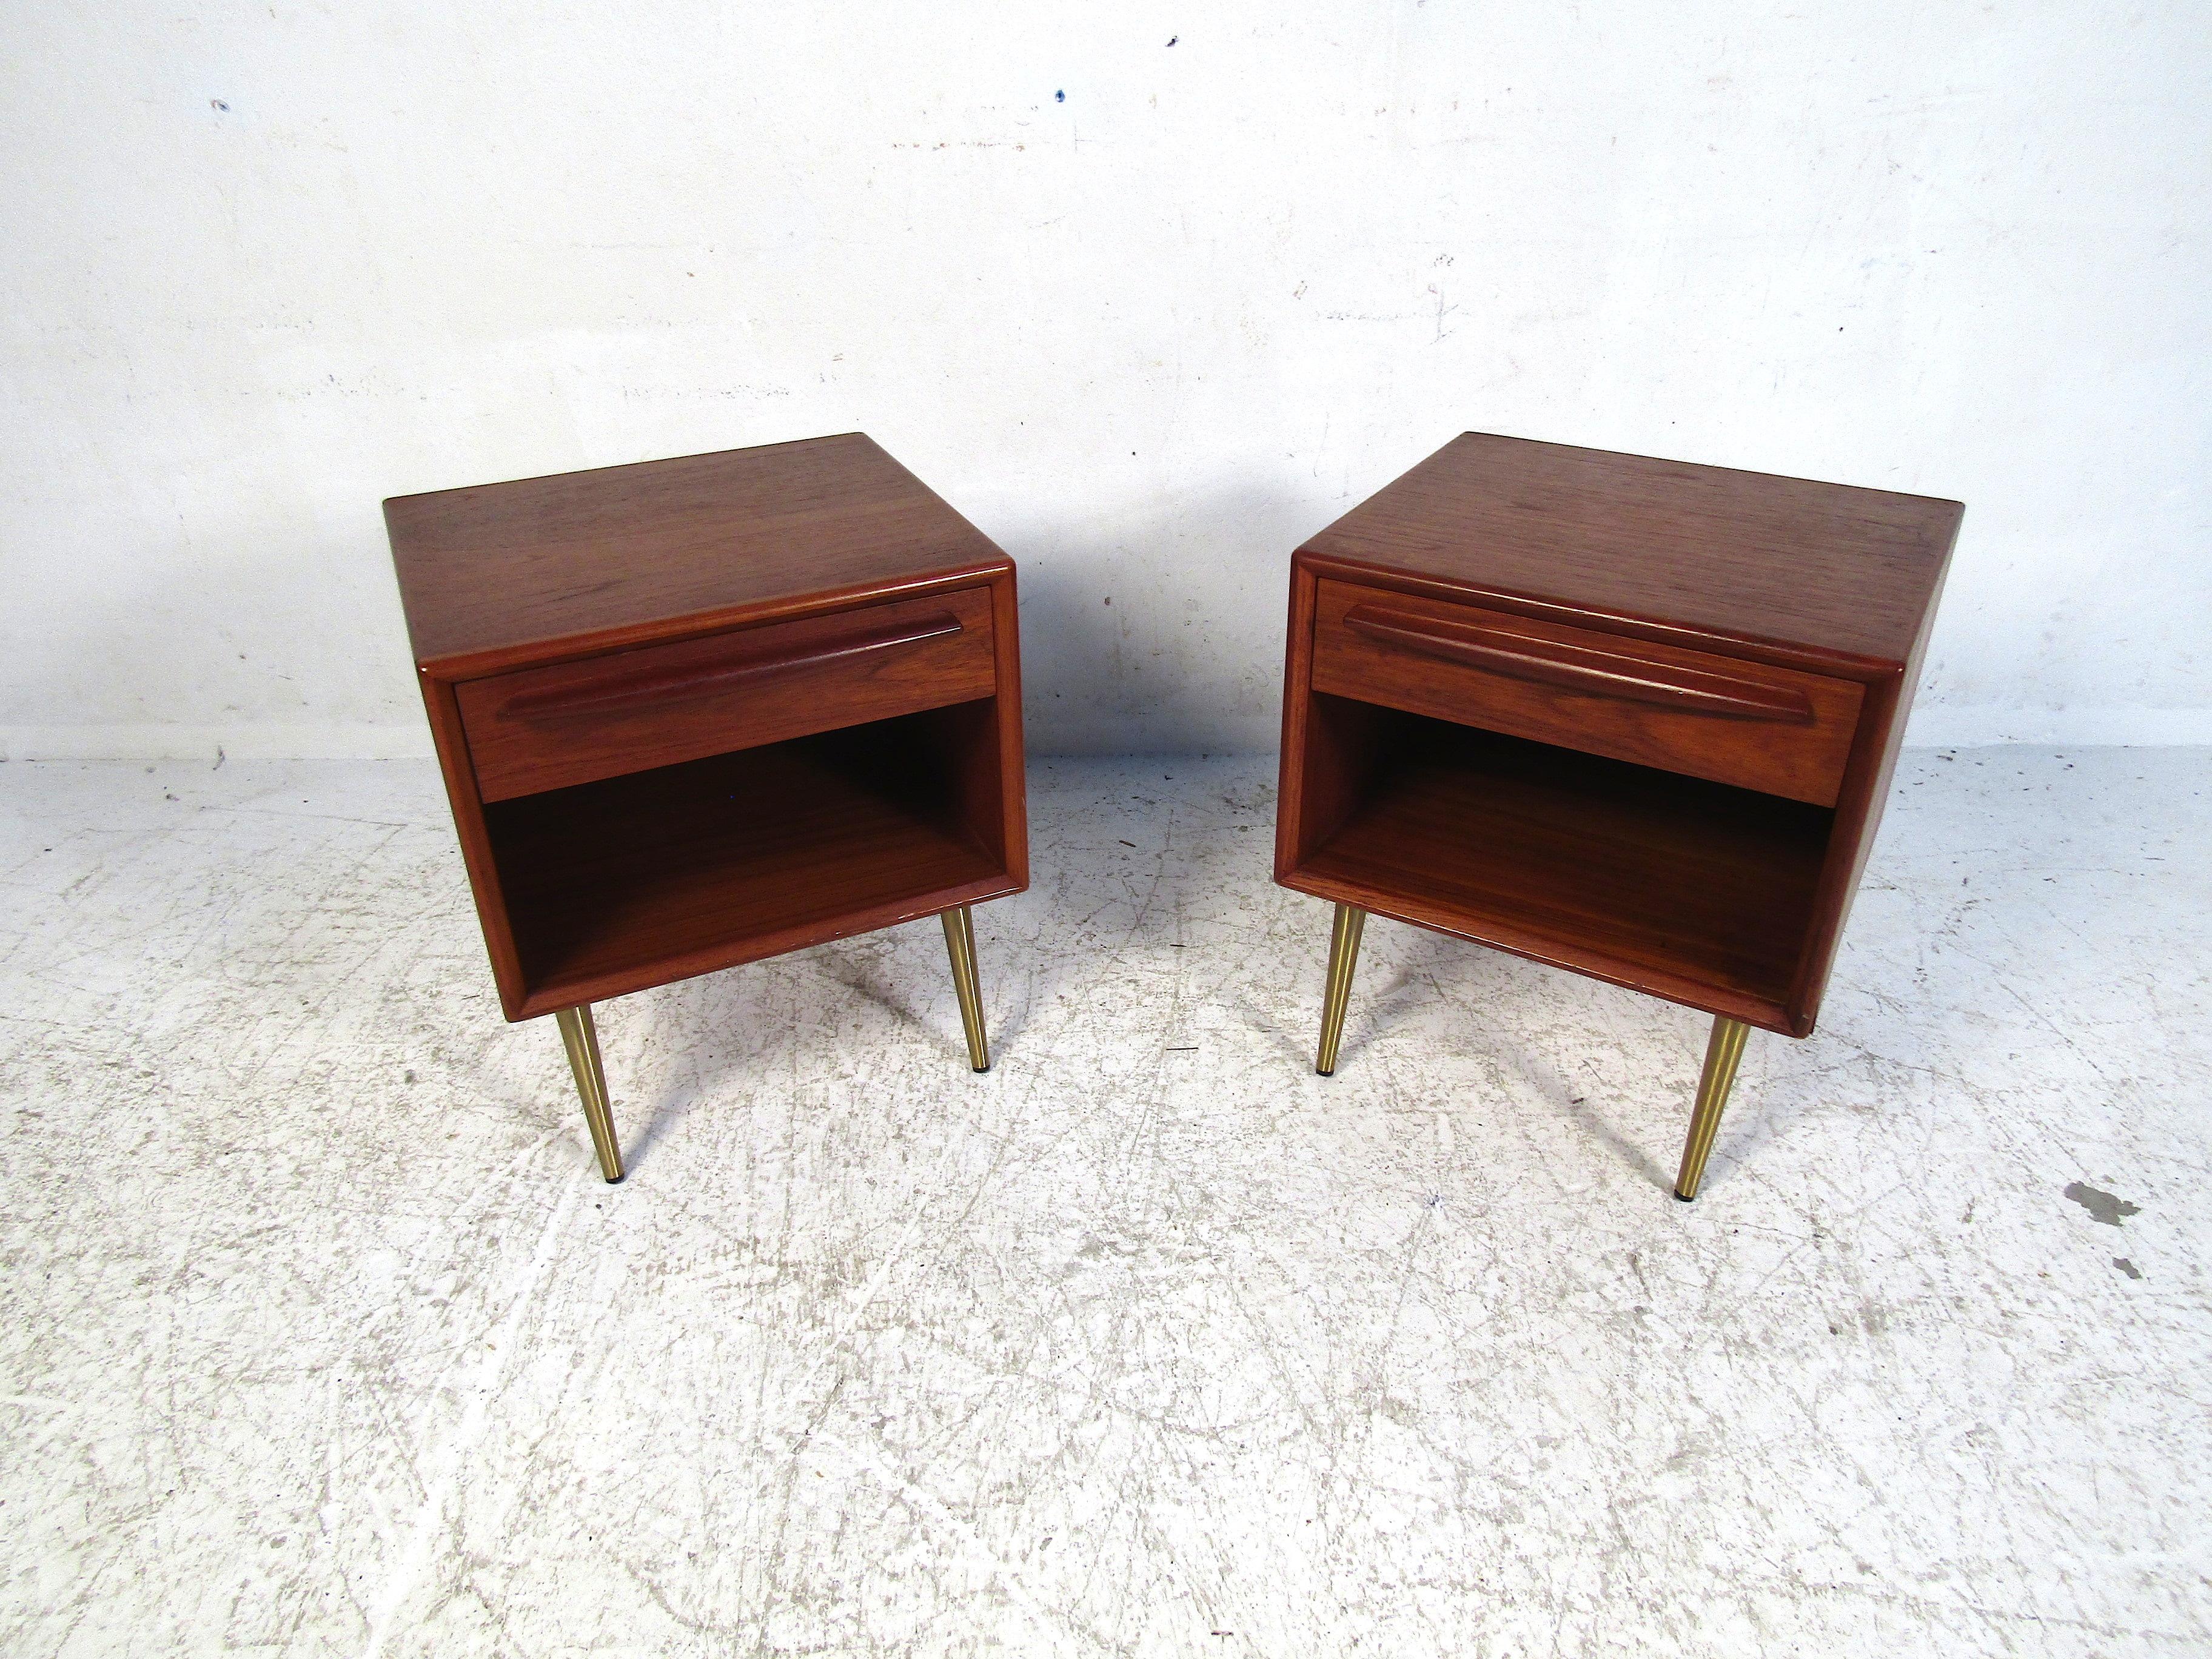 This elegant pair of Danish nightstands feature teak wood and brass legs. Simple in design yet full of style this set will add a degree of sophistication to any bedroom. Please confirm the item location with the dealer. (NJ/NY).